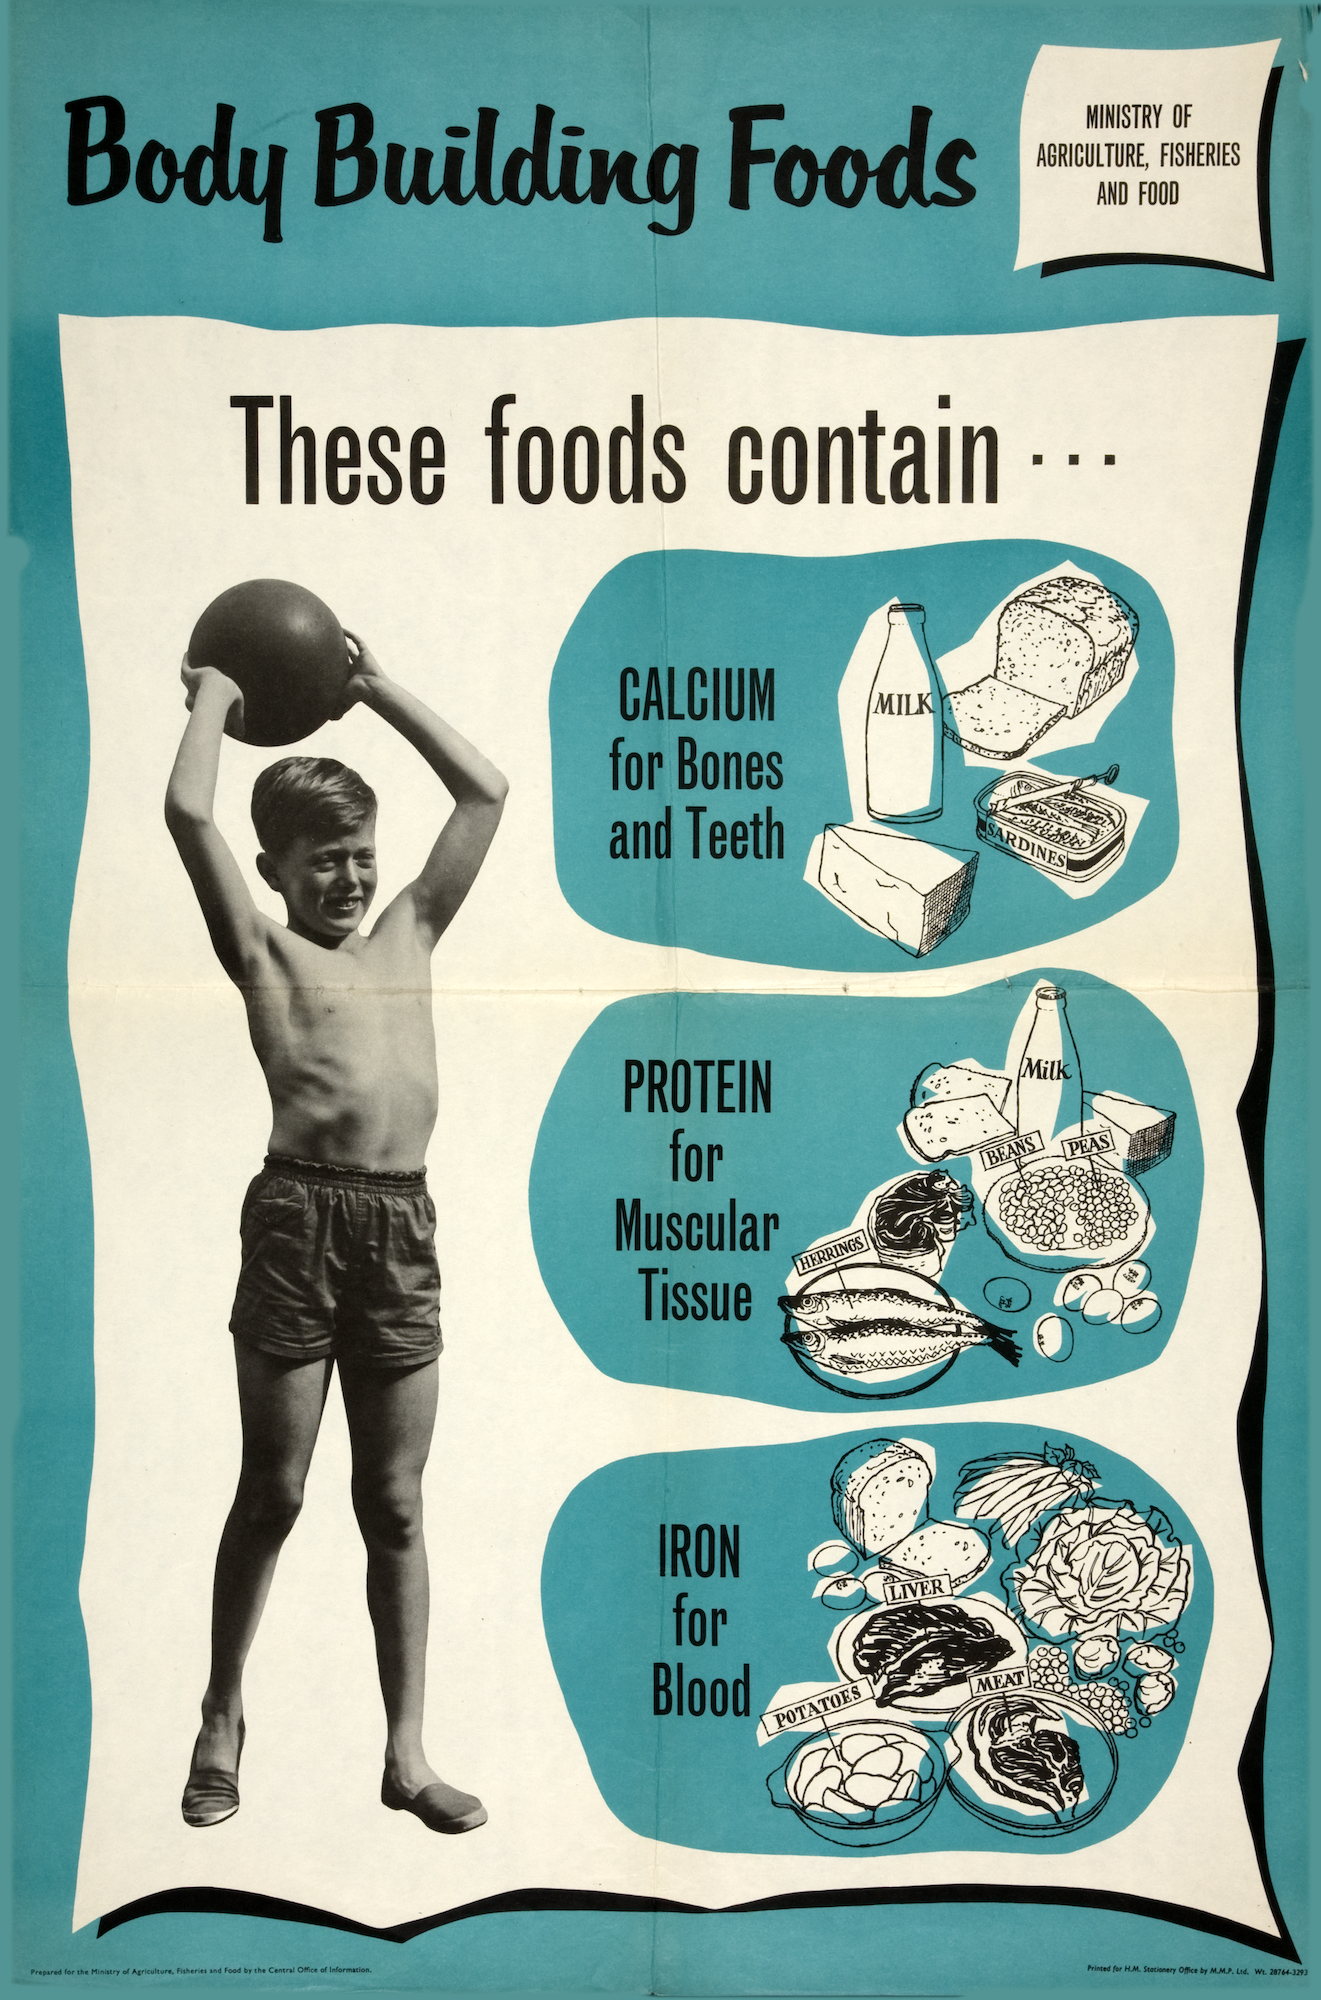 A blue, black and white poster promoting milk and other foods for body building.